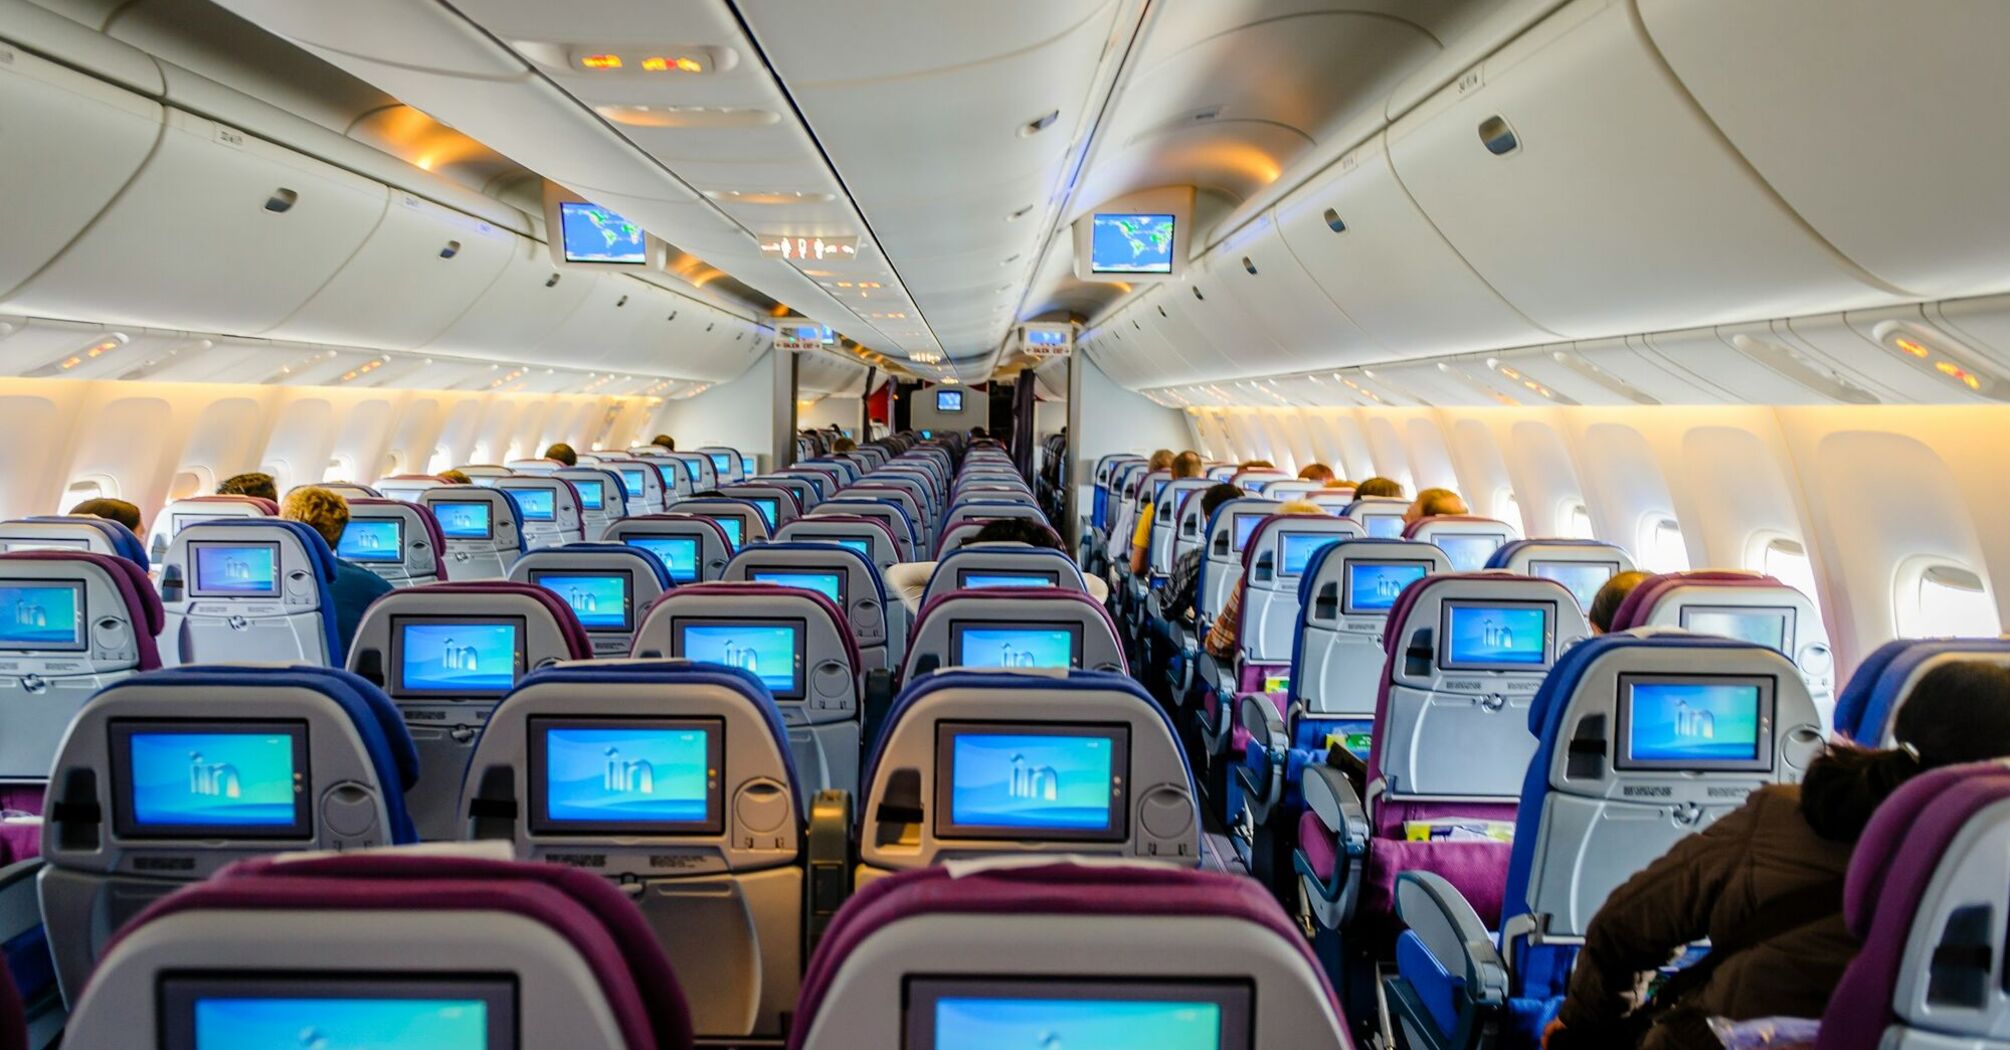 Interior of an airplane showing rows of seats with personal entertainment screens illuminated, cabin overhead lighting, and passengers seated 